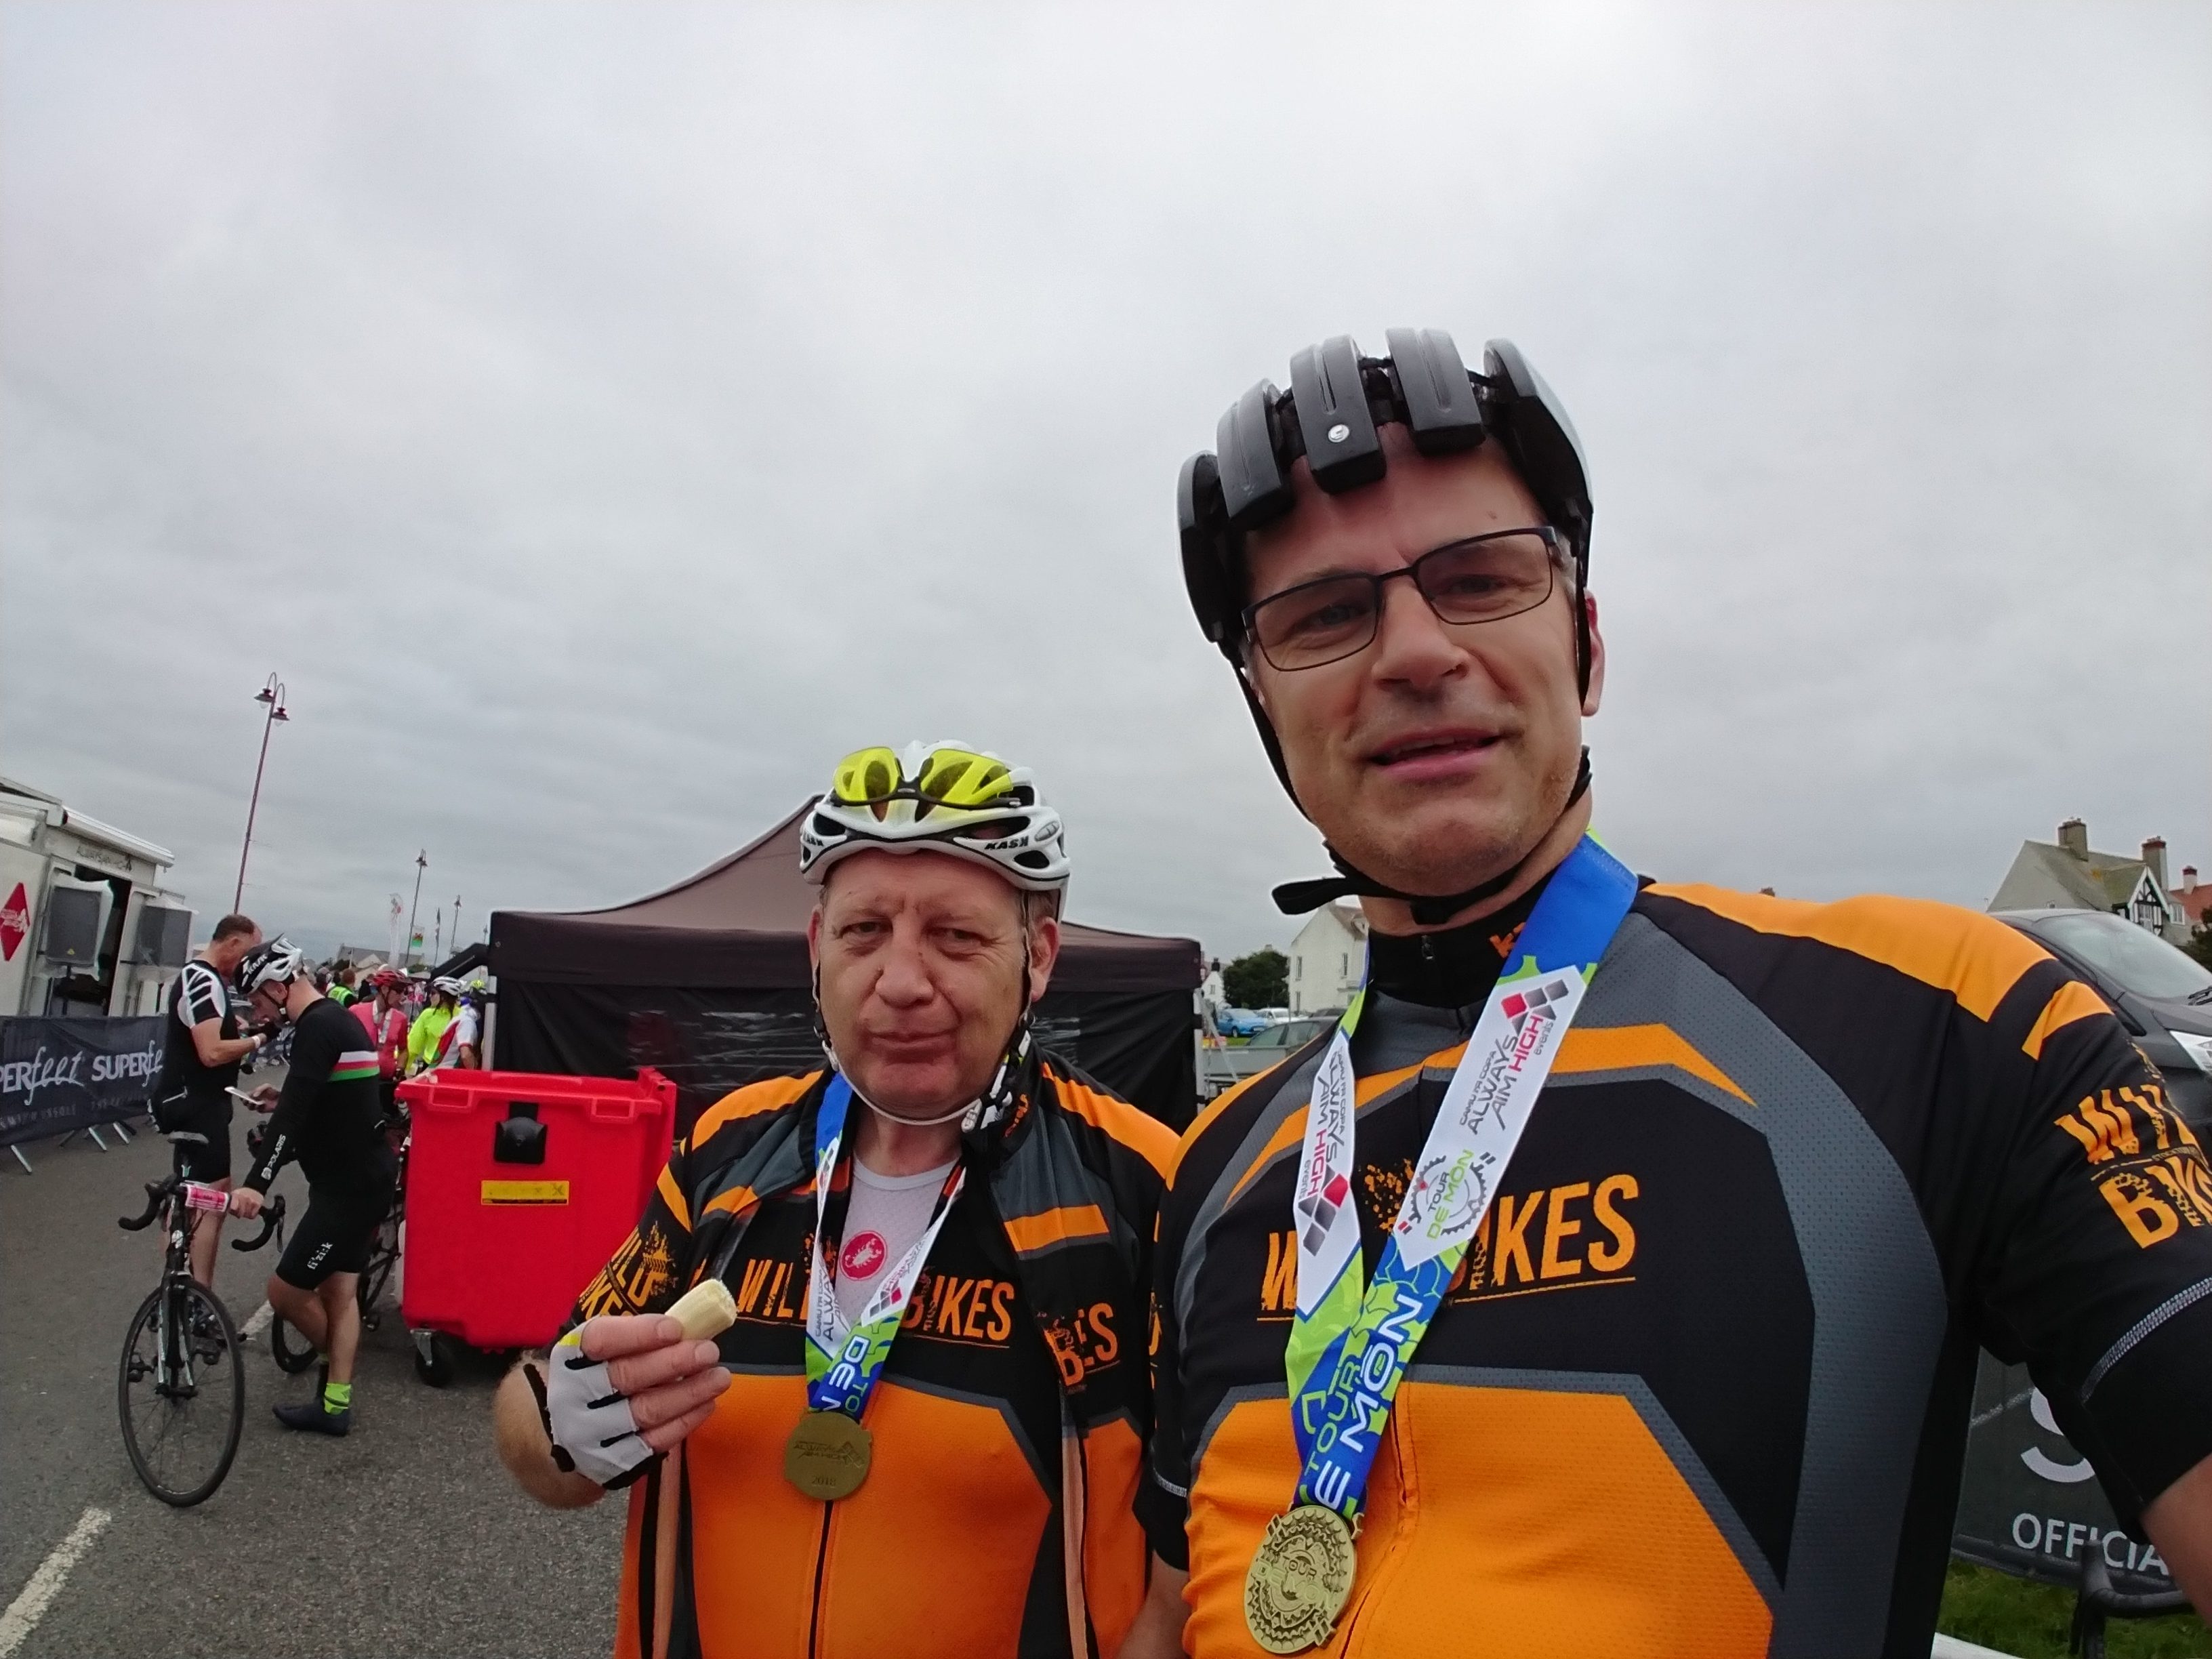 Nigel and Mike proudly sporting their Tour de Mon medals